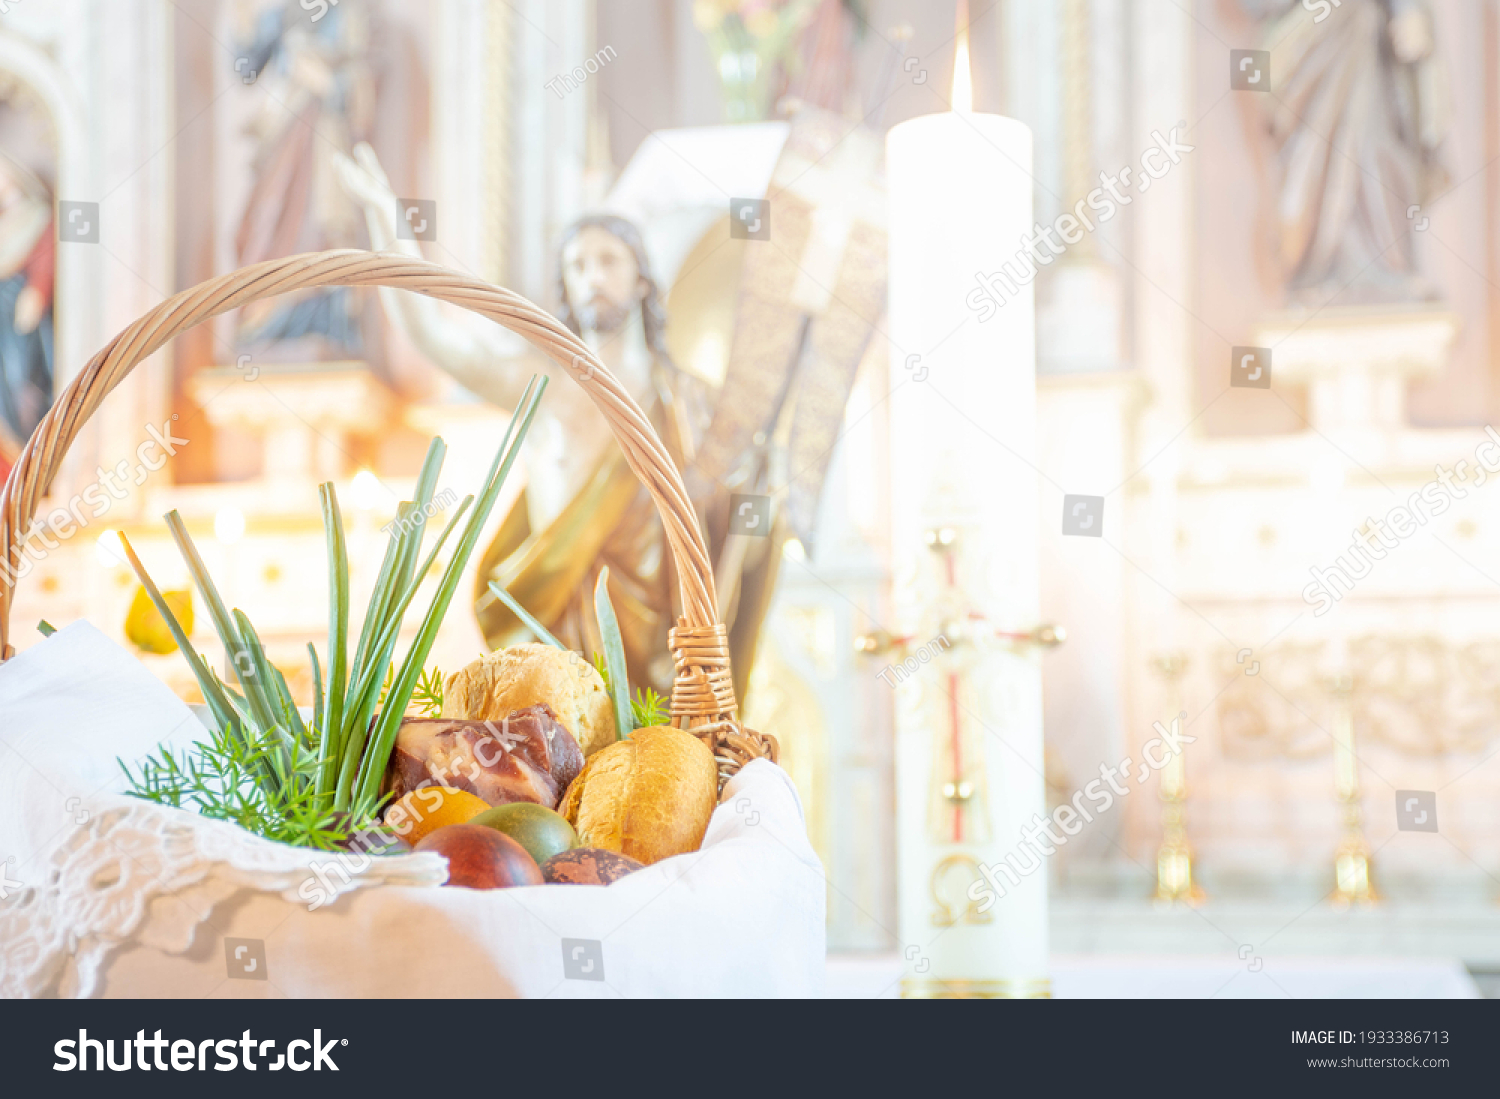 Easter food basket for blessing in church, catholic eastern european custom with eggs, spring onion, ham and bread, artistic edit #1933386713